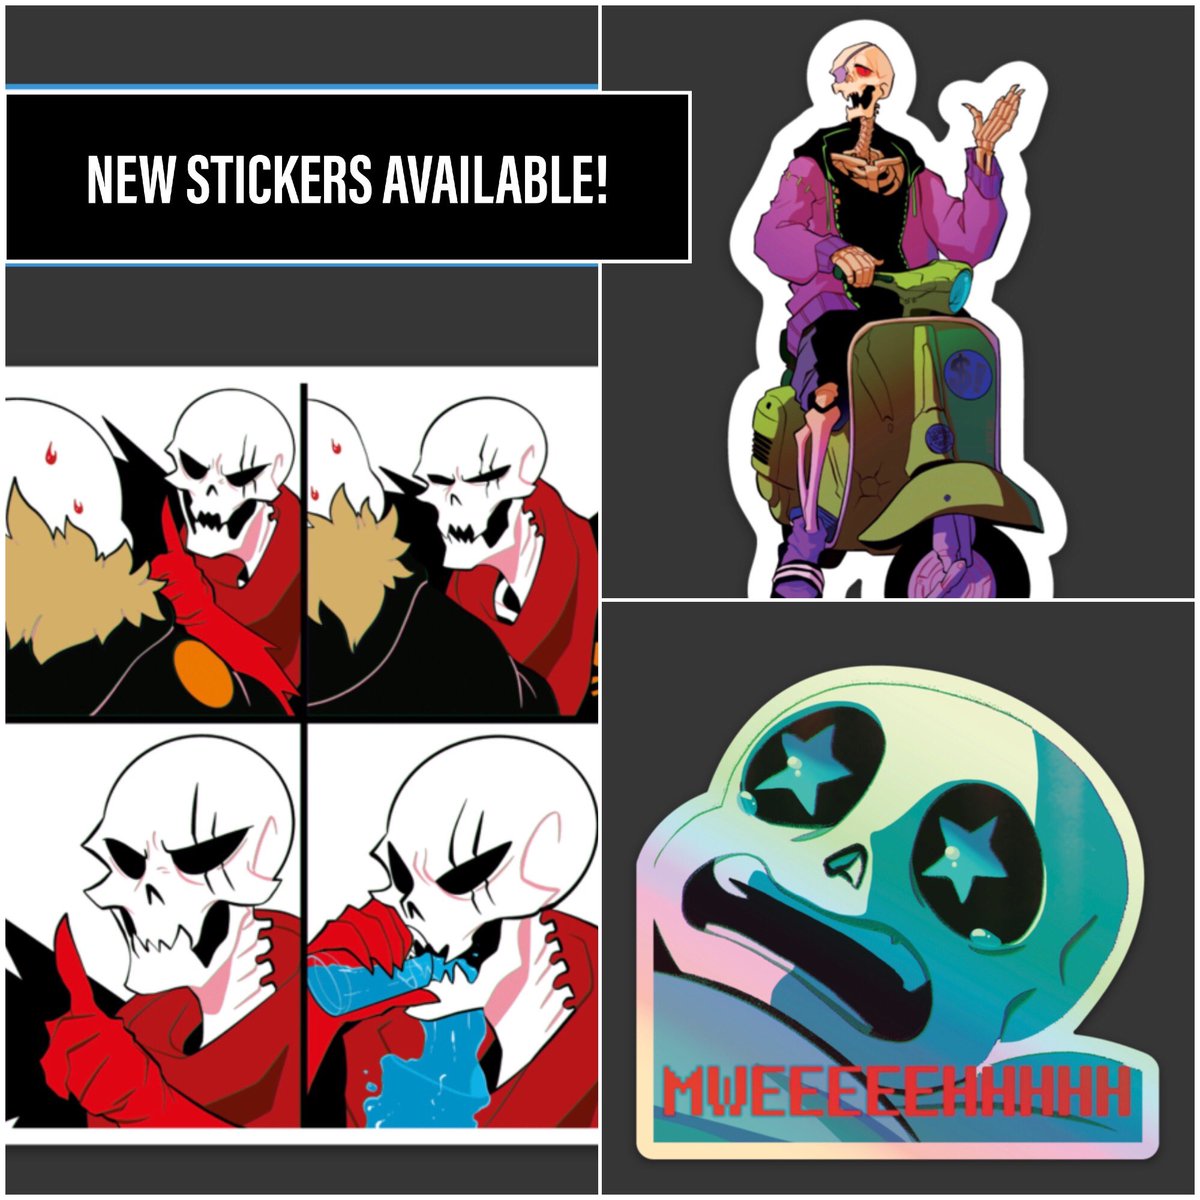 New stickers have arrived as well as restocks of long sold out designs! And an Underfell Acrylic Pin is now available!
SHOP: https://t.co/3coHx0nfm3
#undertaleAU #underfell #fellswap
#underswap #errorsans https://t.co/9pvncKEU61 